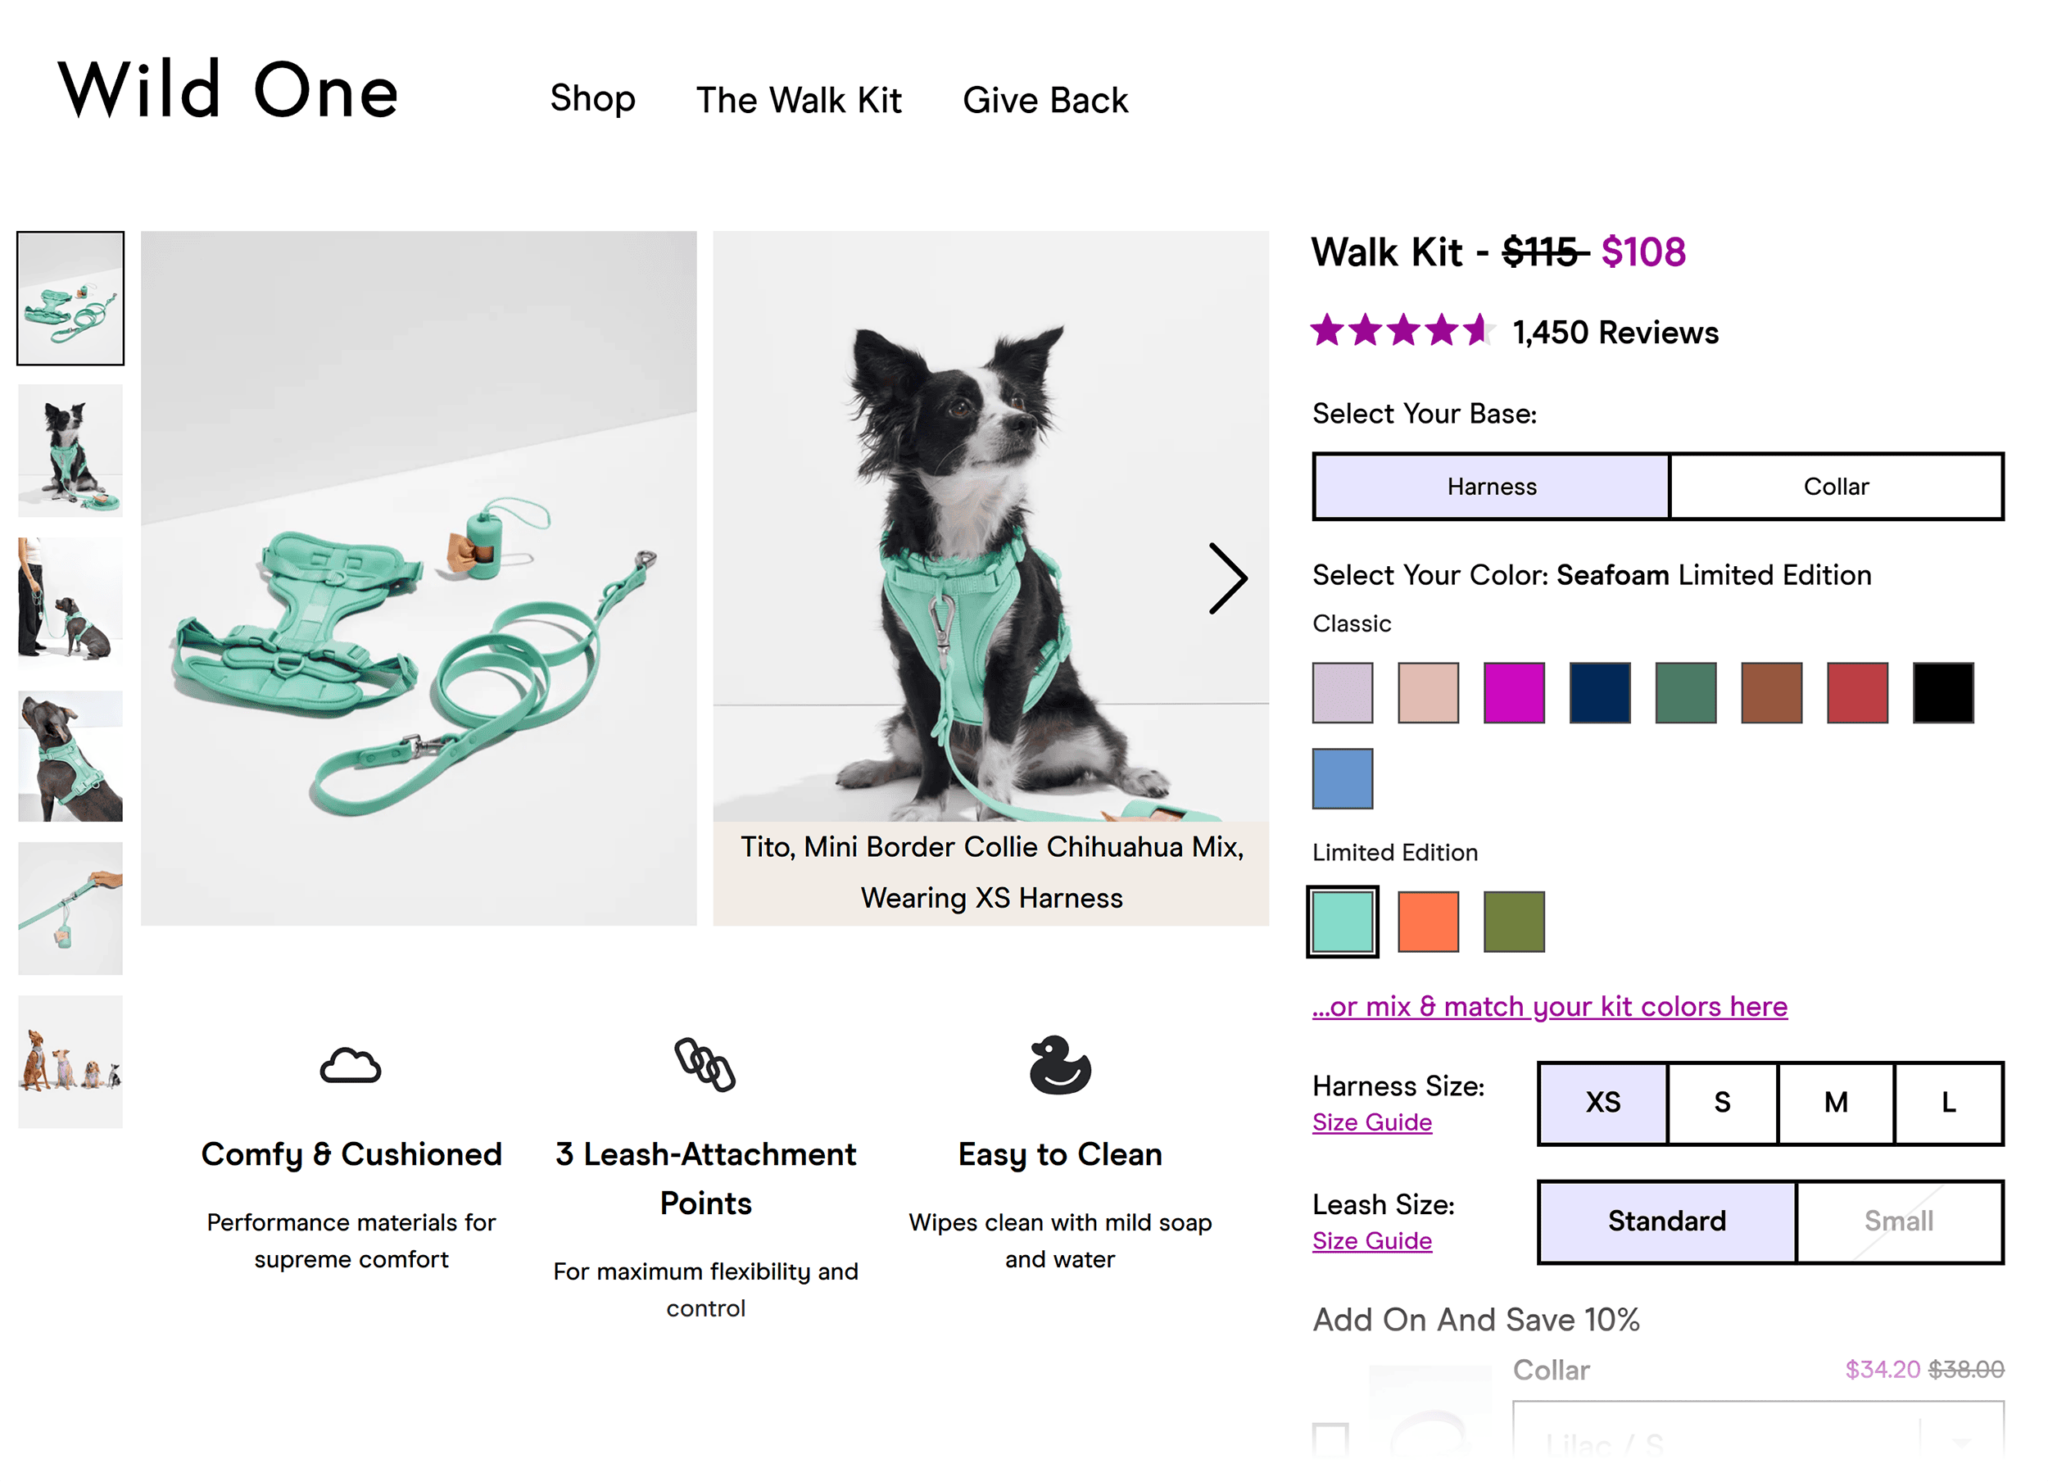 wildone-harness-walk-kit 20 Effective Product Page Examples (+ Best Practices)